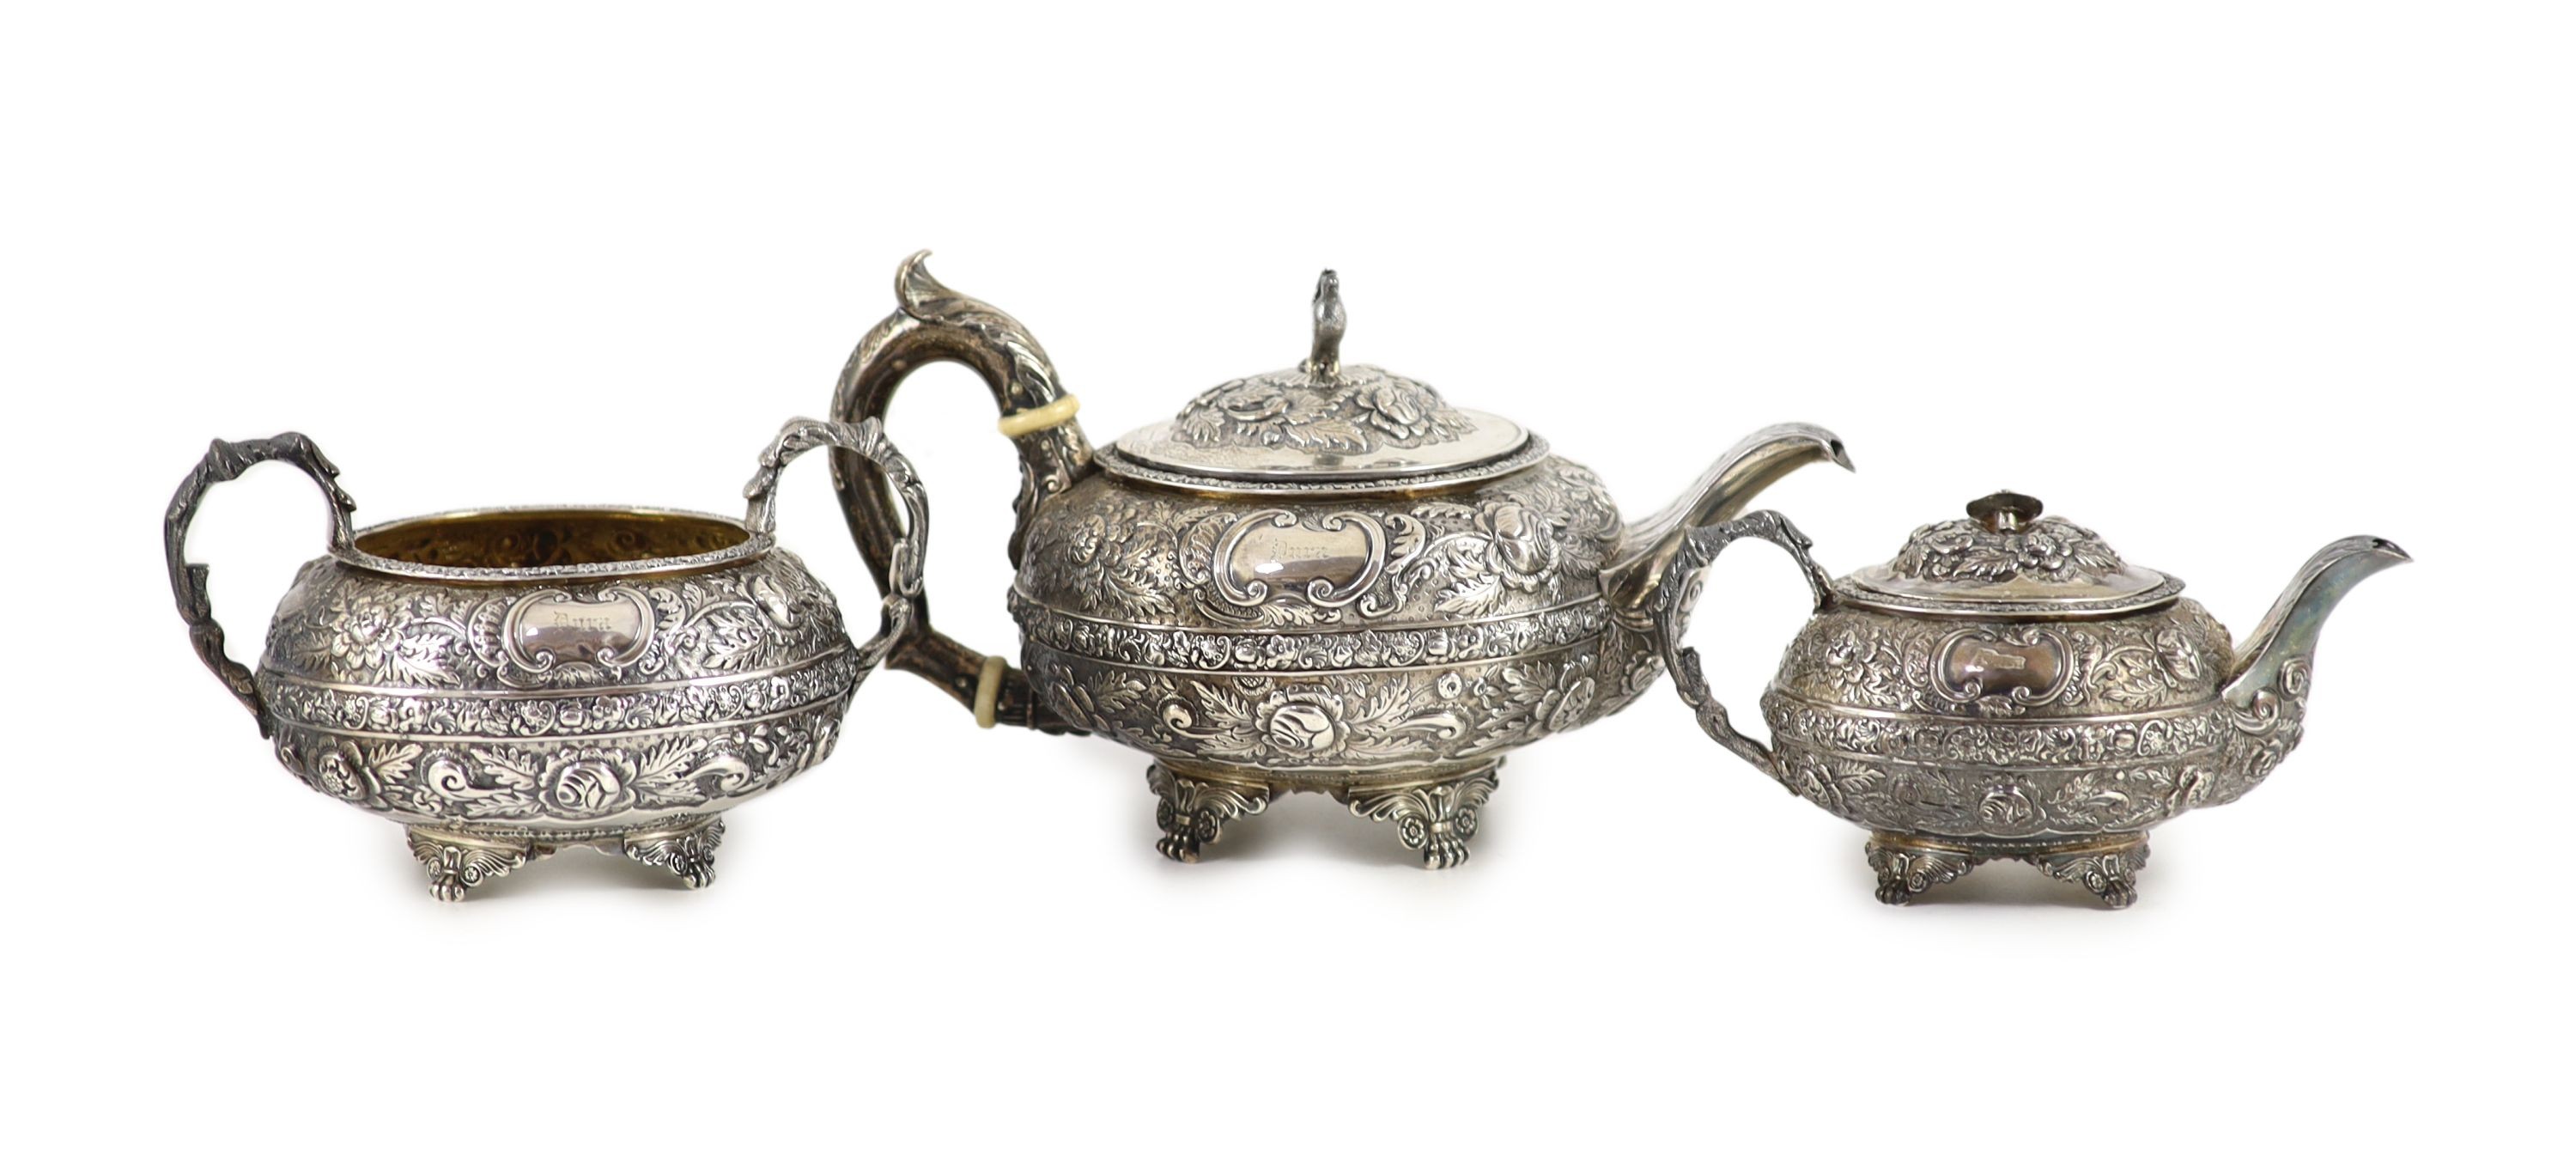 A late George III provincial silver three piece tea set by James Barber & William Whitwell                                                                                                                                  